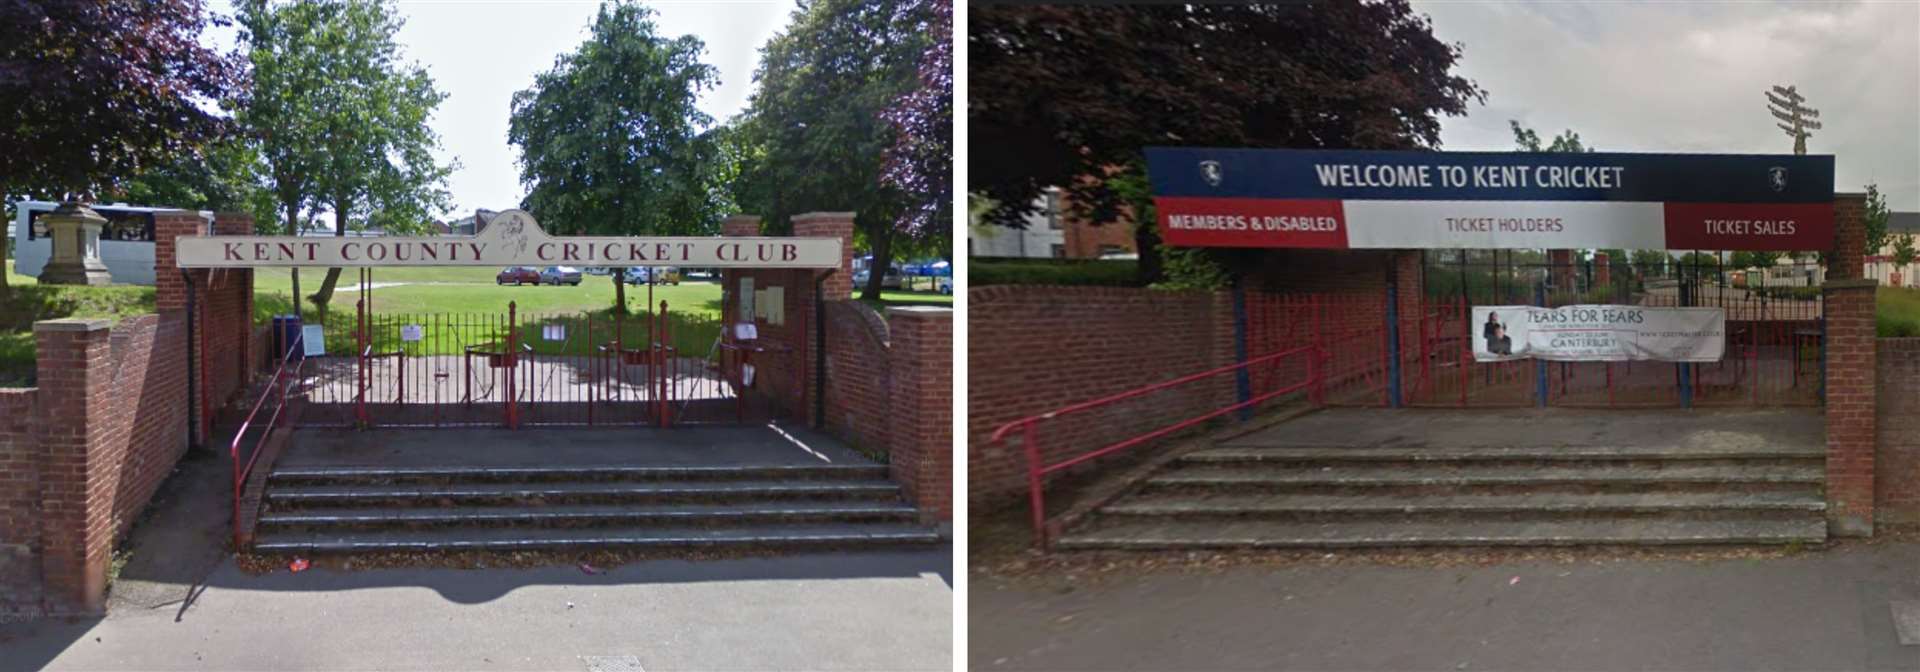 The gates to the grounds in 2009 (left), and how the entrance looks today. Pictures: Google